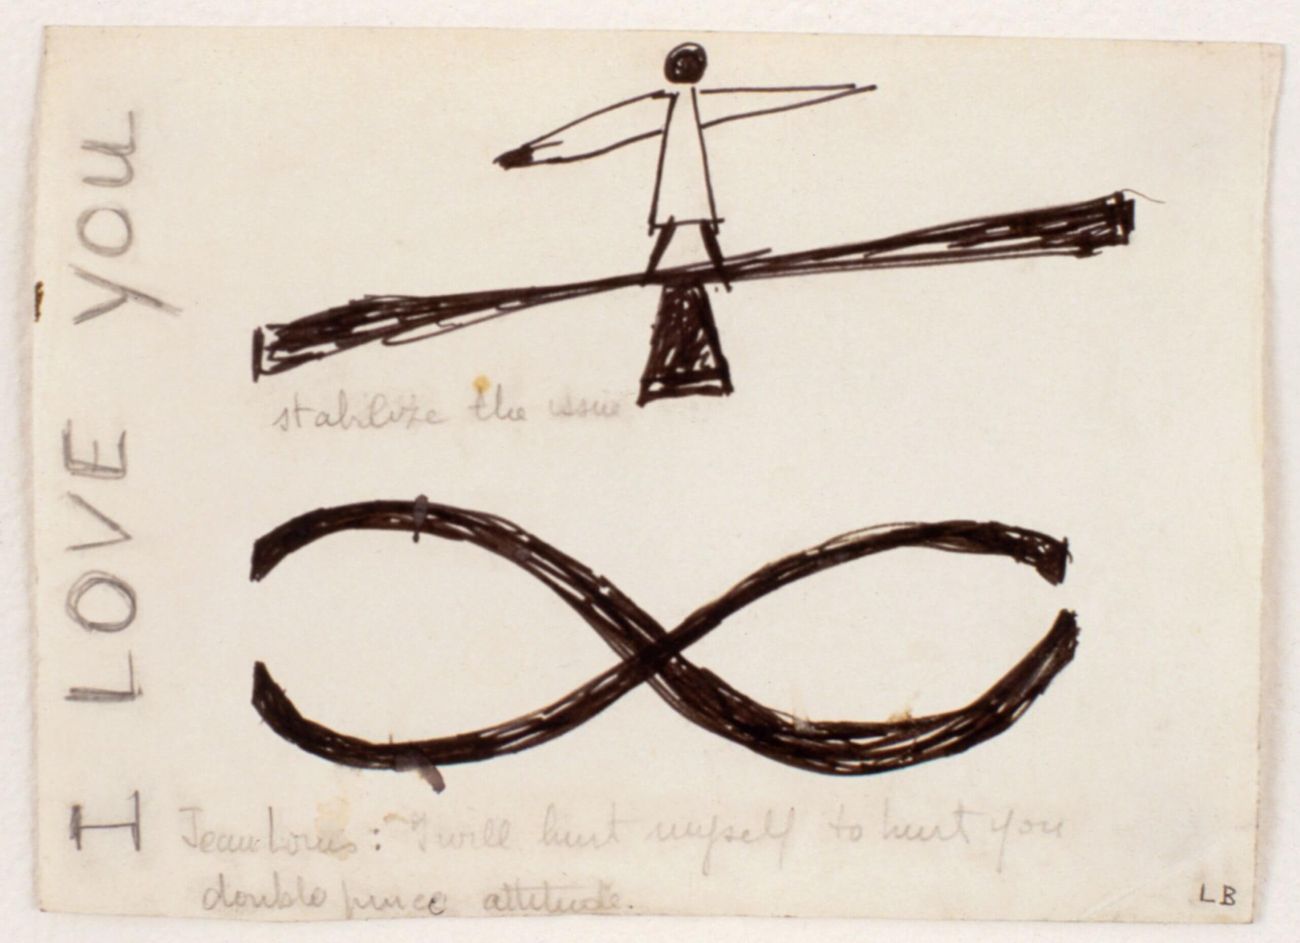 Louise Bourgeois, Untitled, 1960. Courtesy Hauser & Wirth